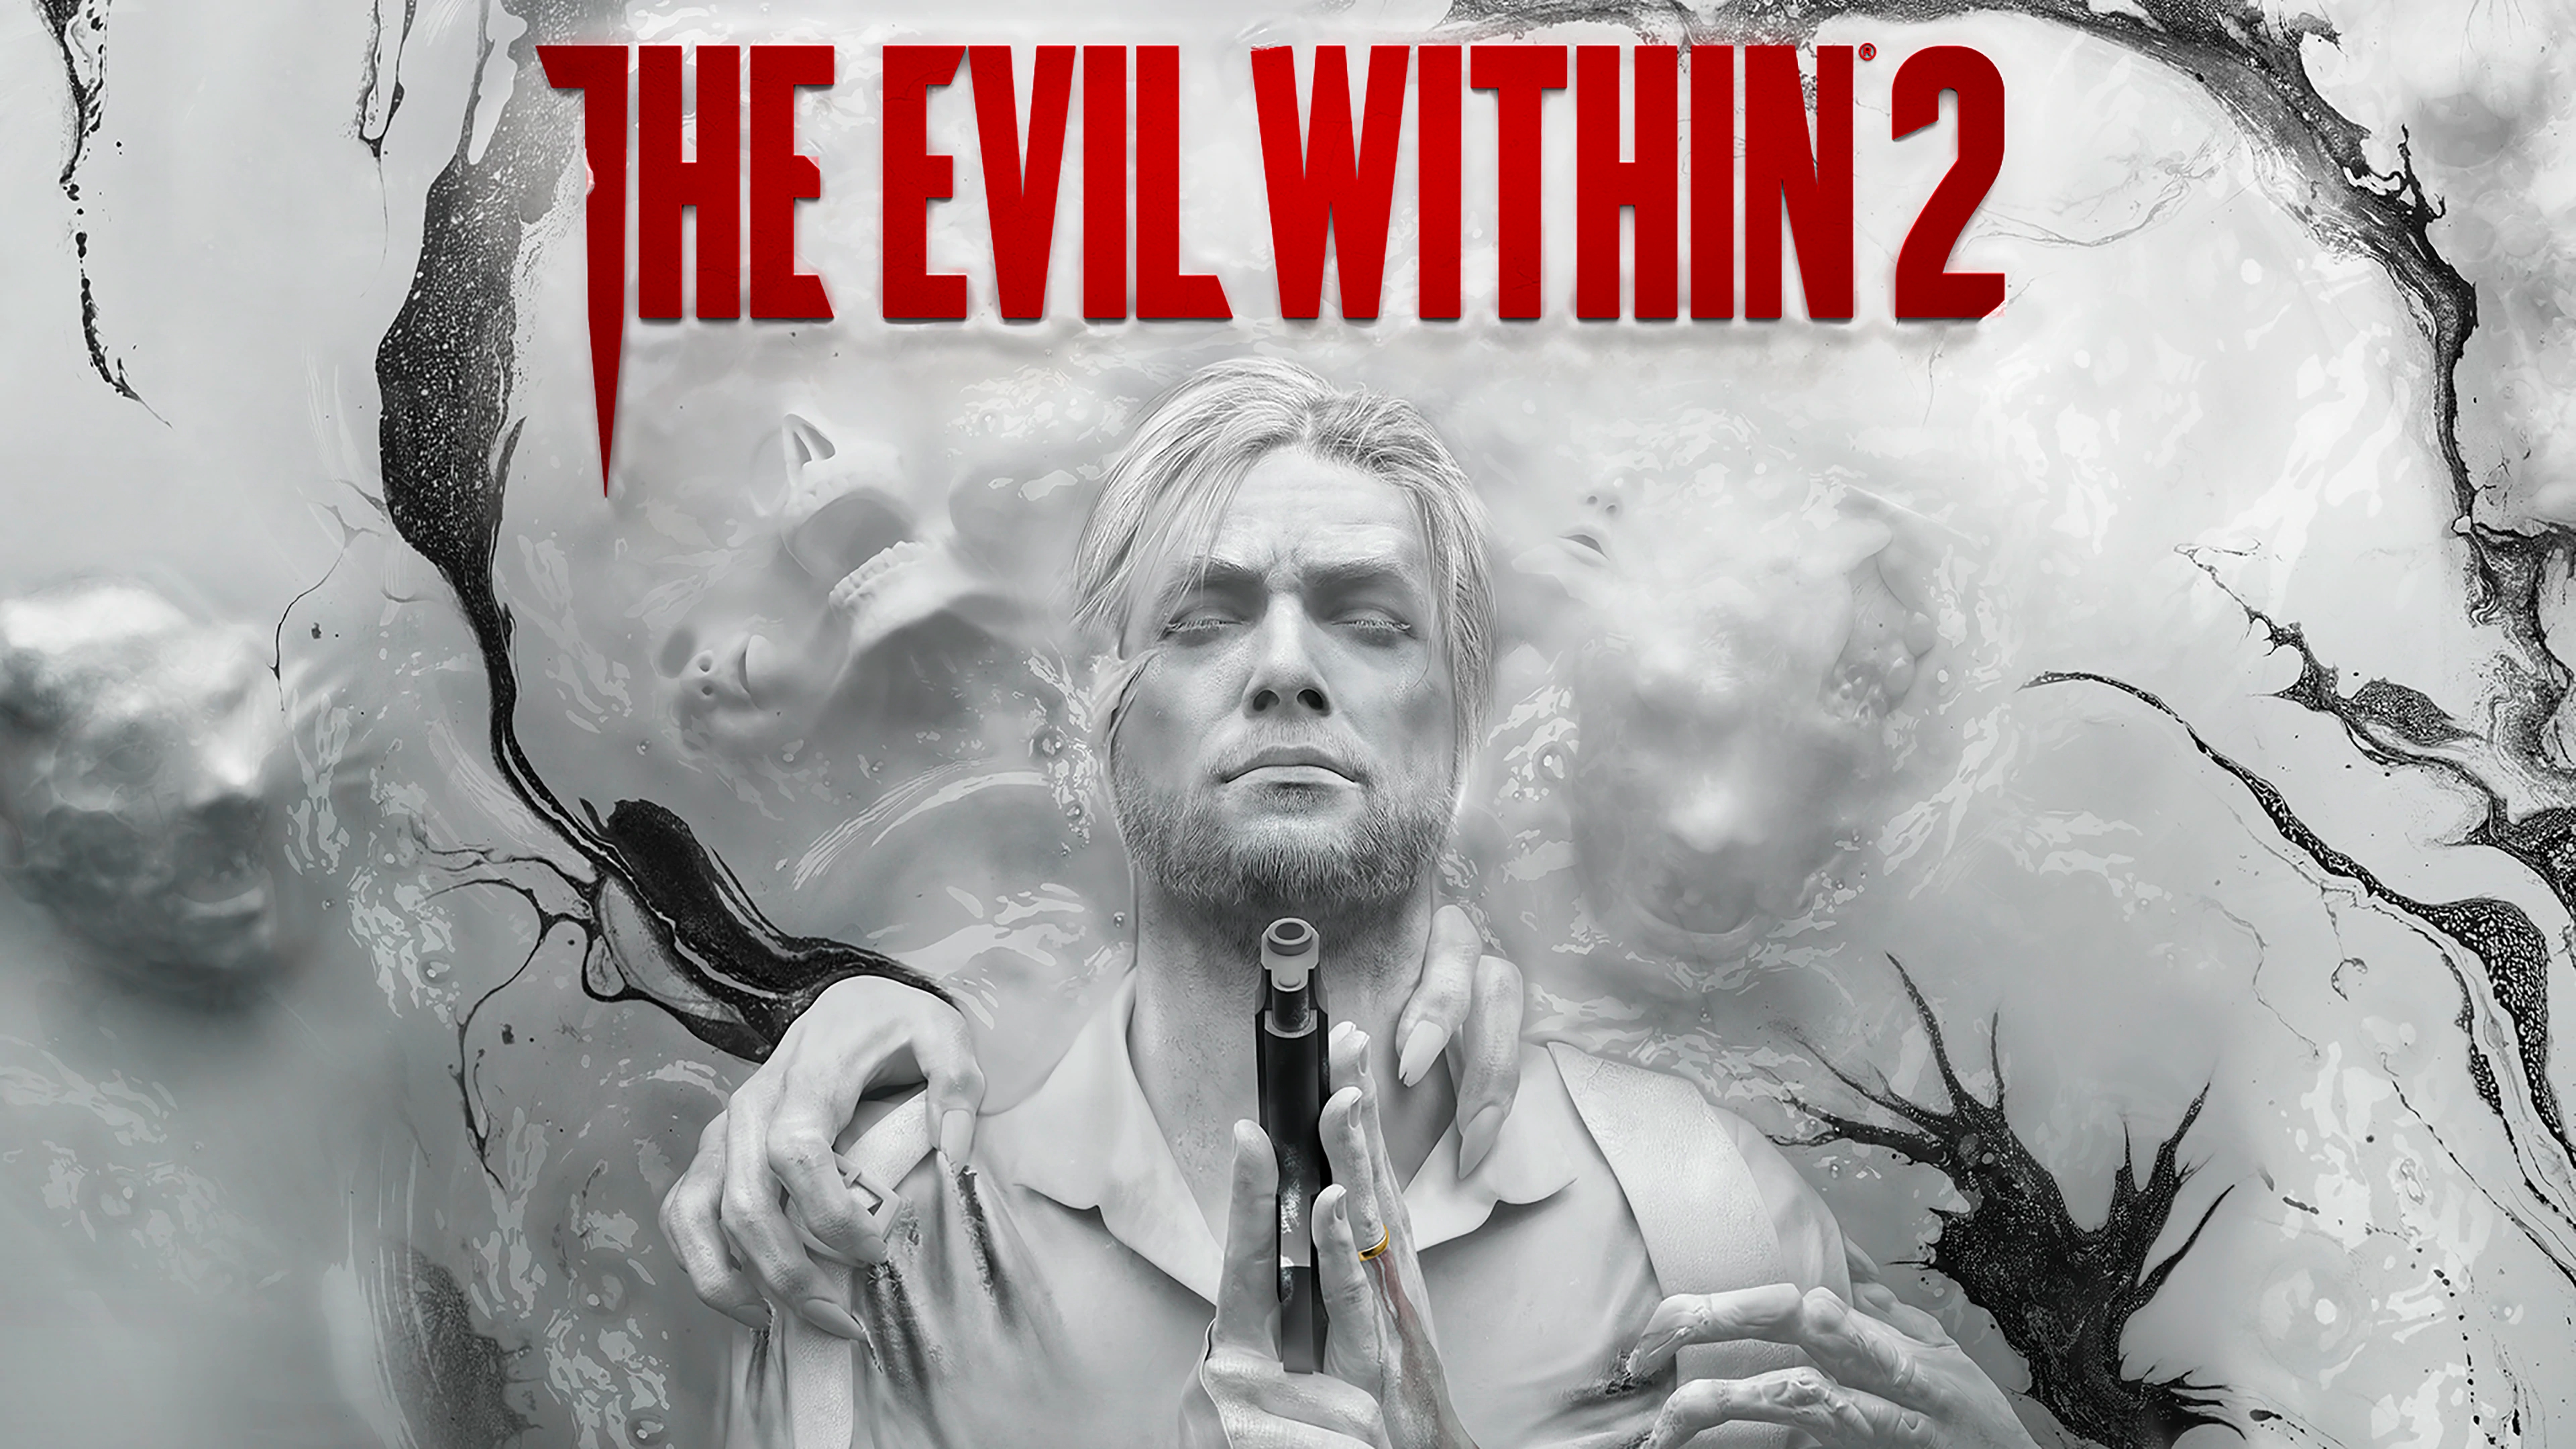 The Evil Within 2  Download and Buy Today - Epic Games Store